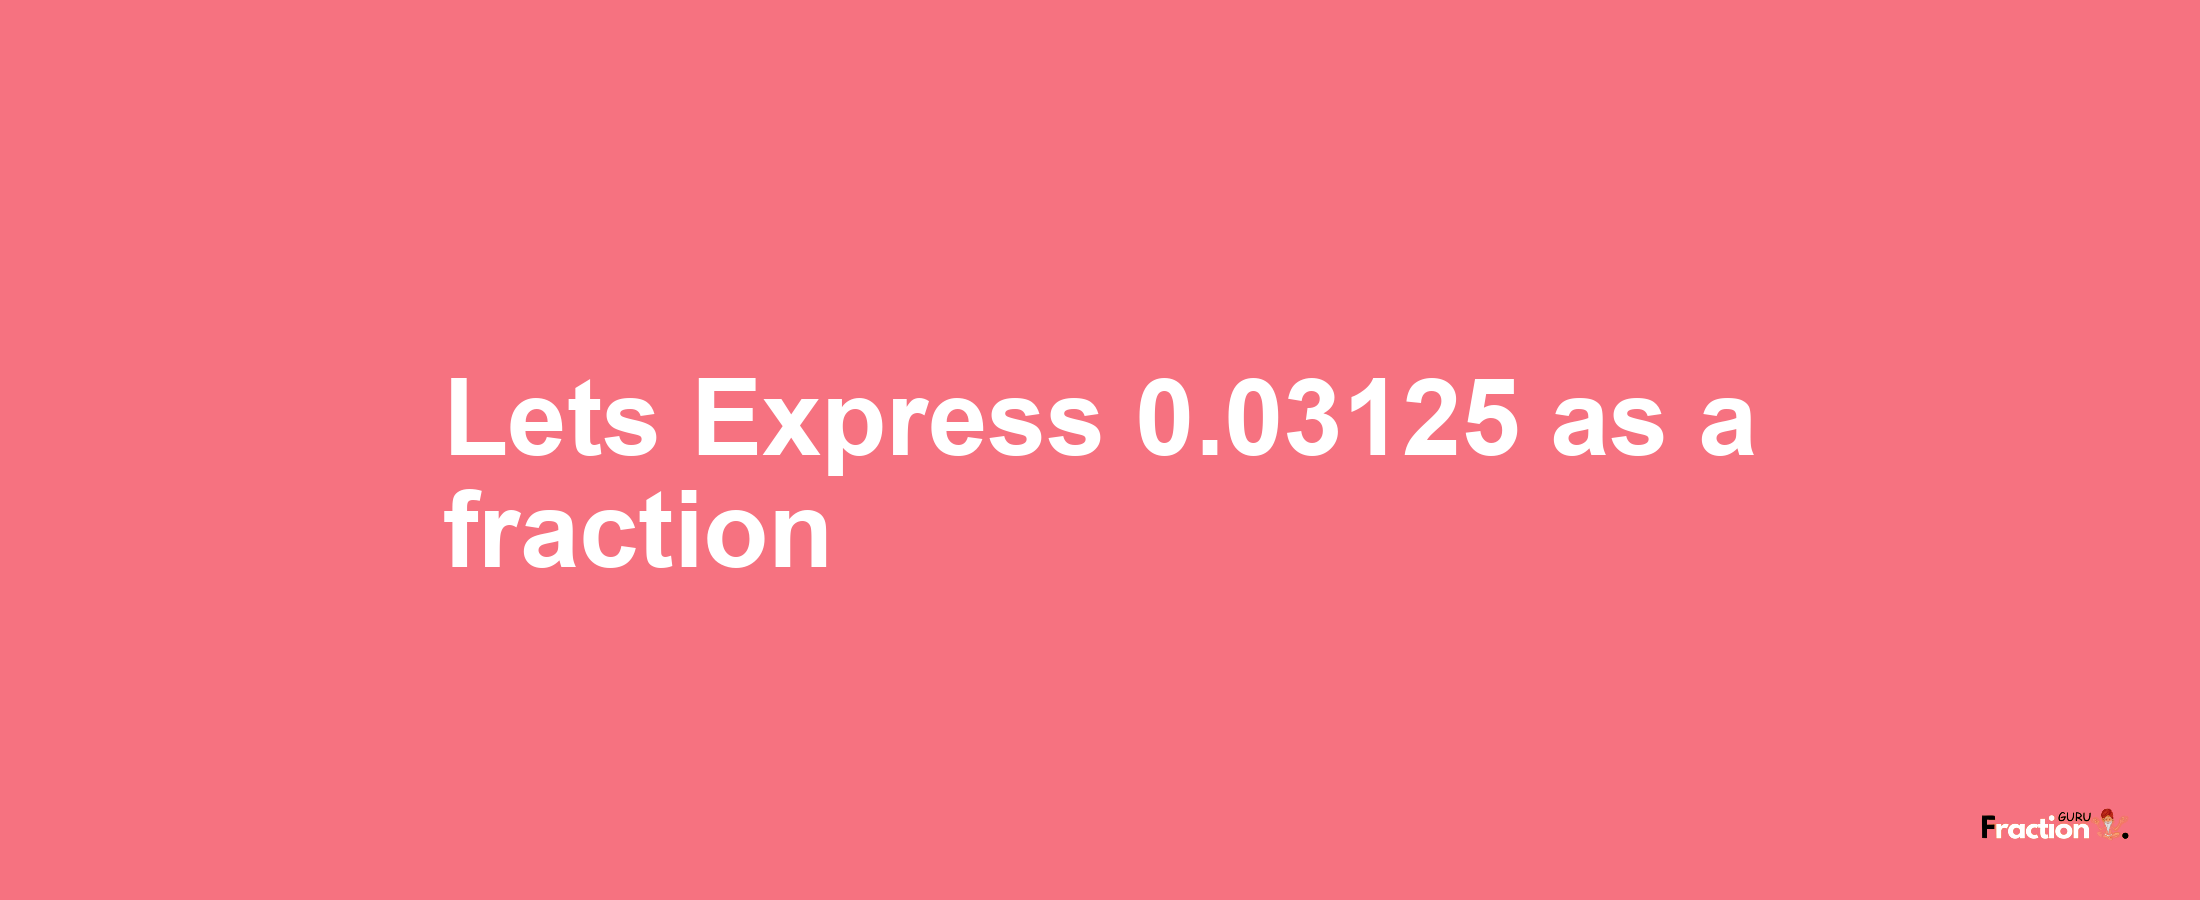 Lets Express 0.03125 as afraction